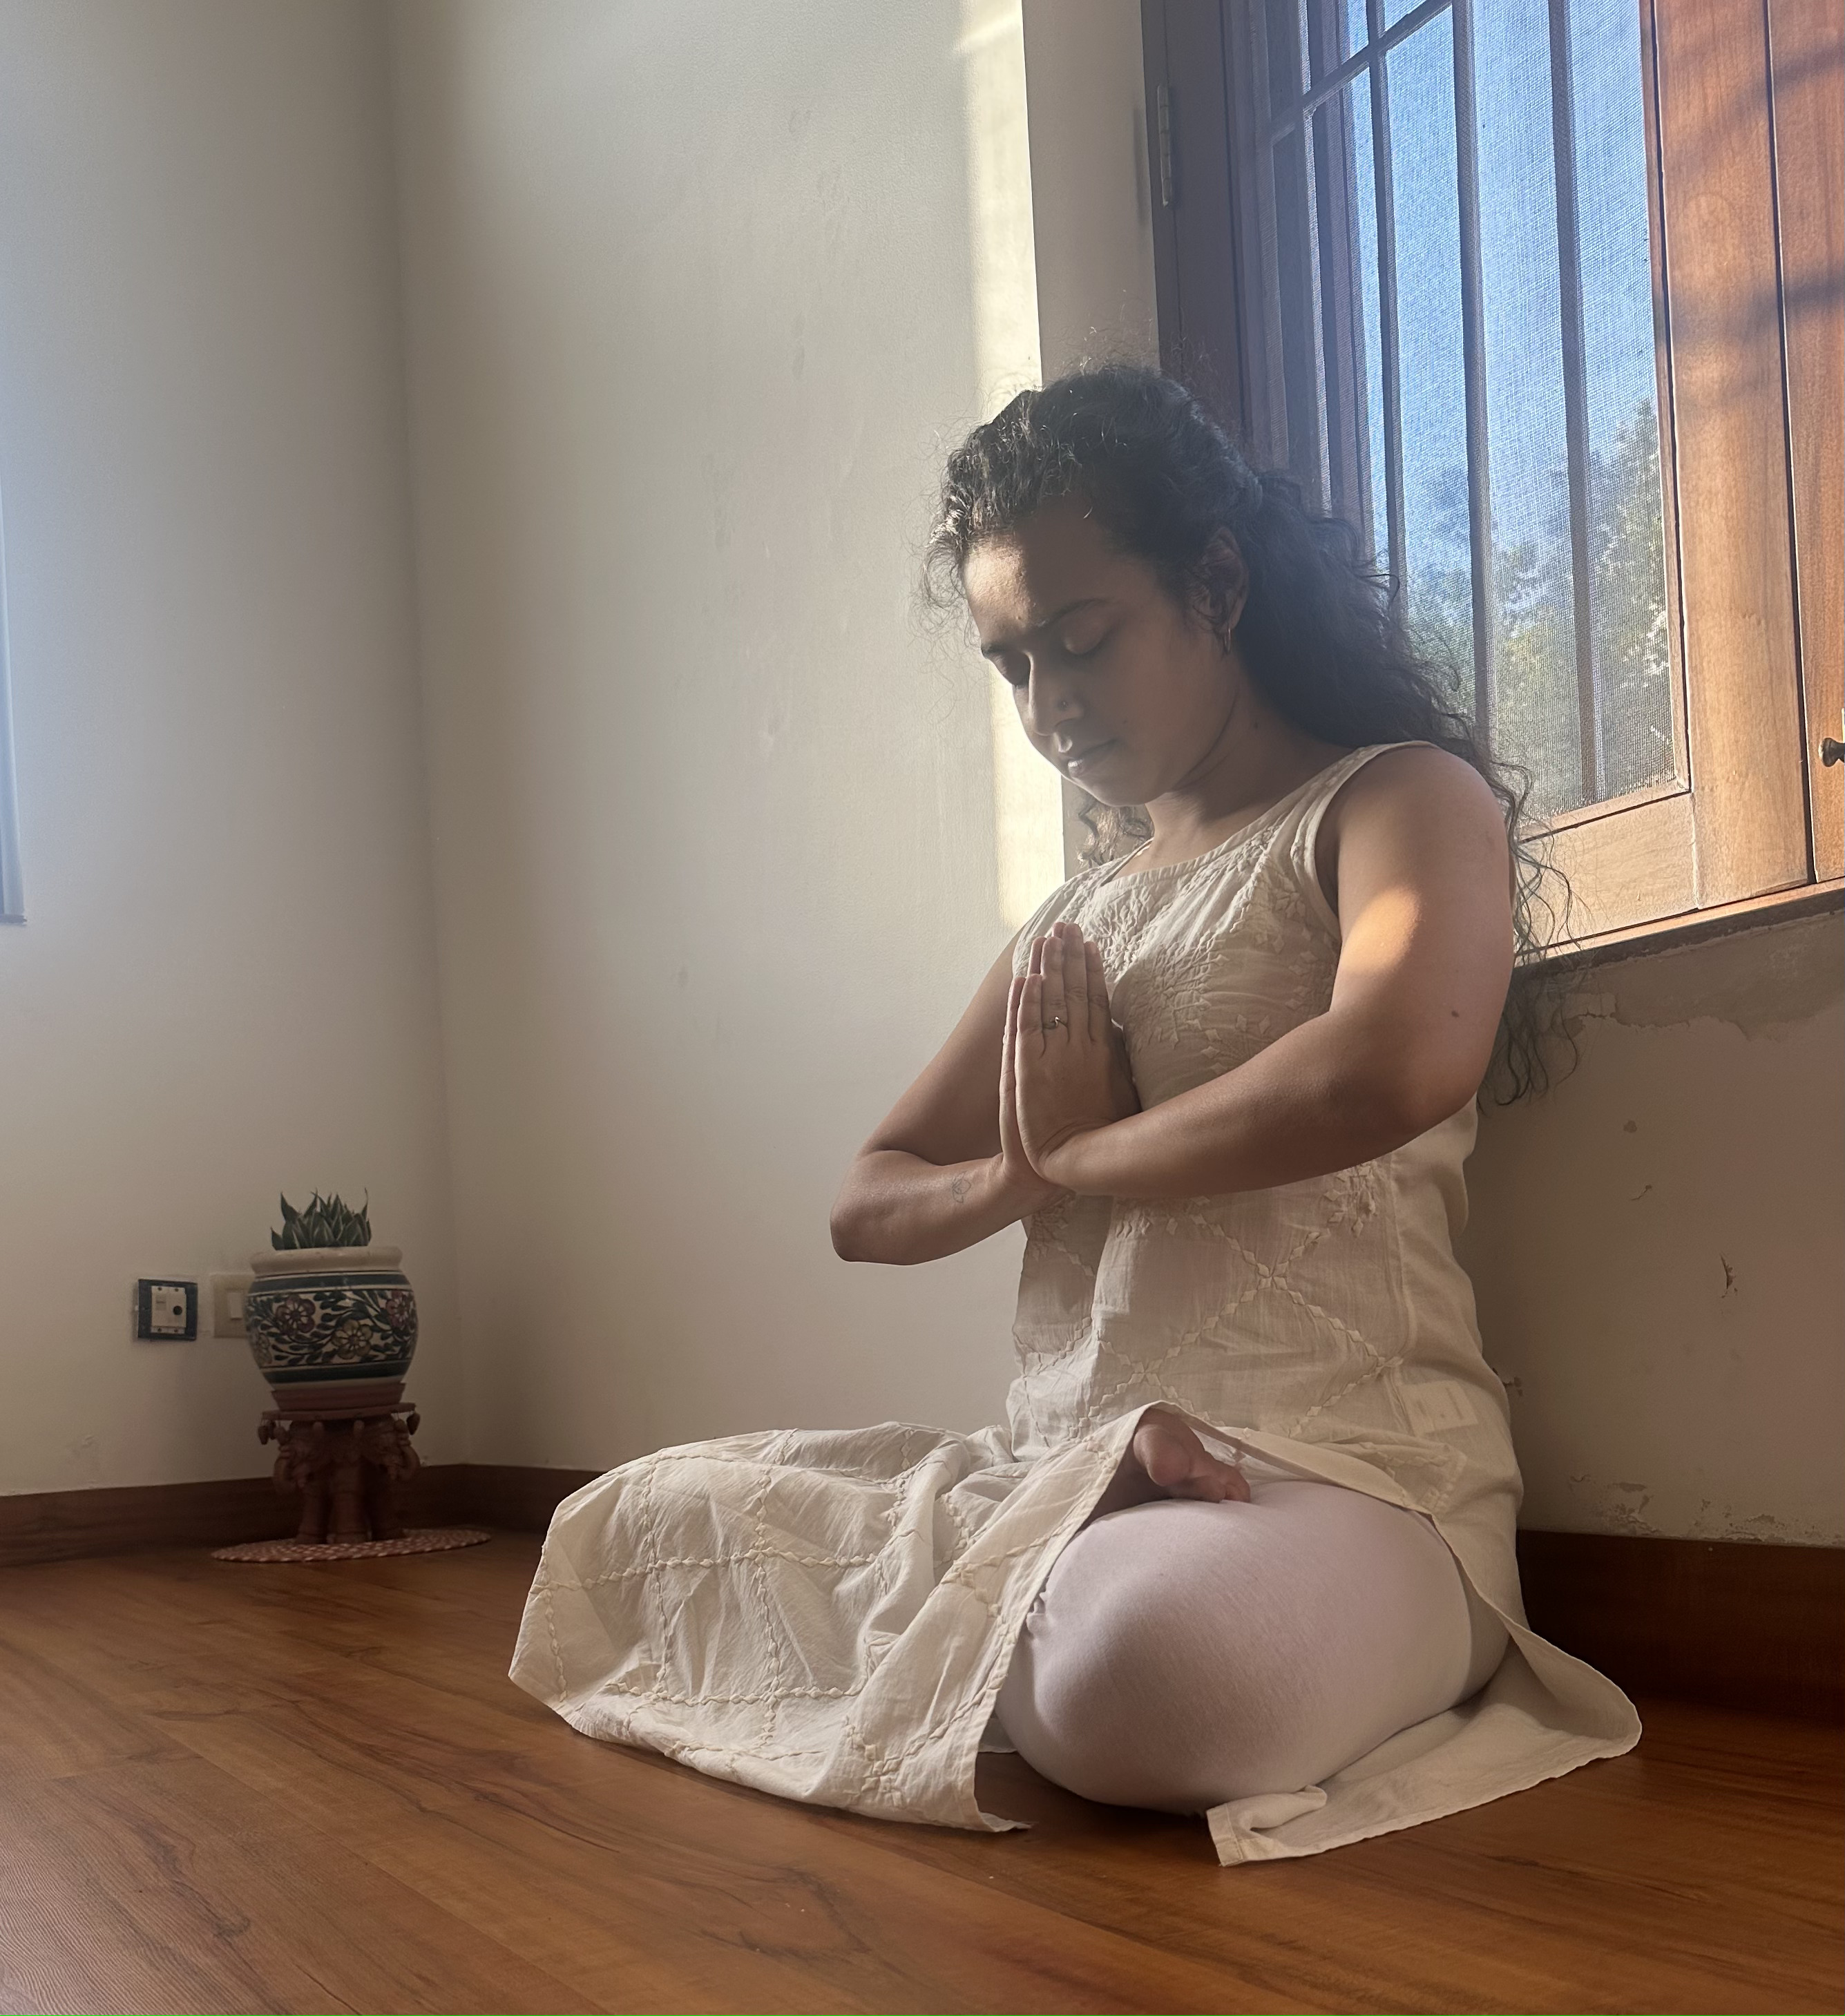 Healing mind and body with Yoga